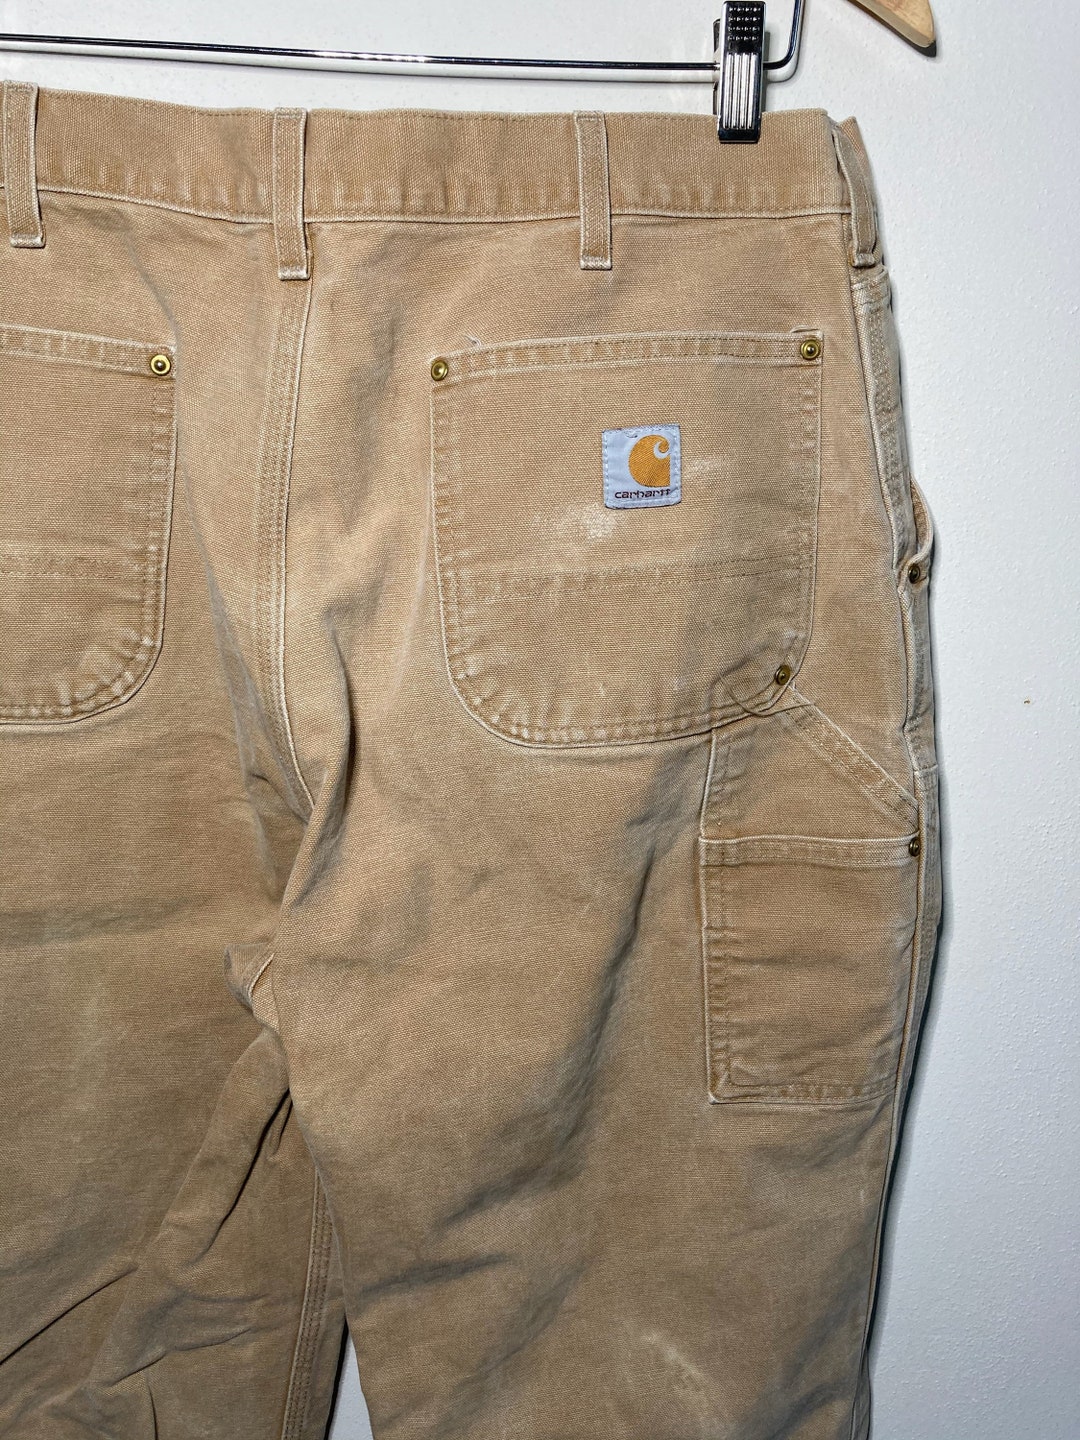 Preowned Carhartt Brown Double Knee Work Dungaree - Etsy